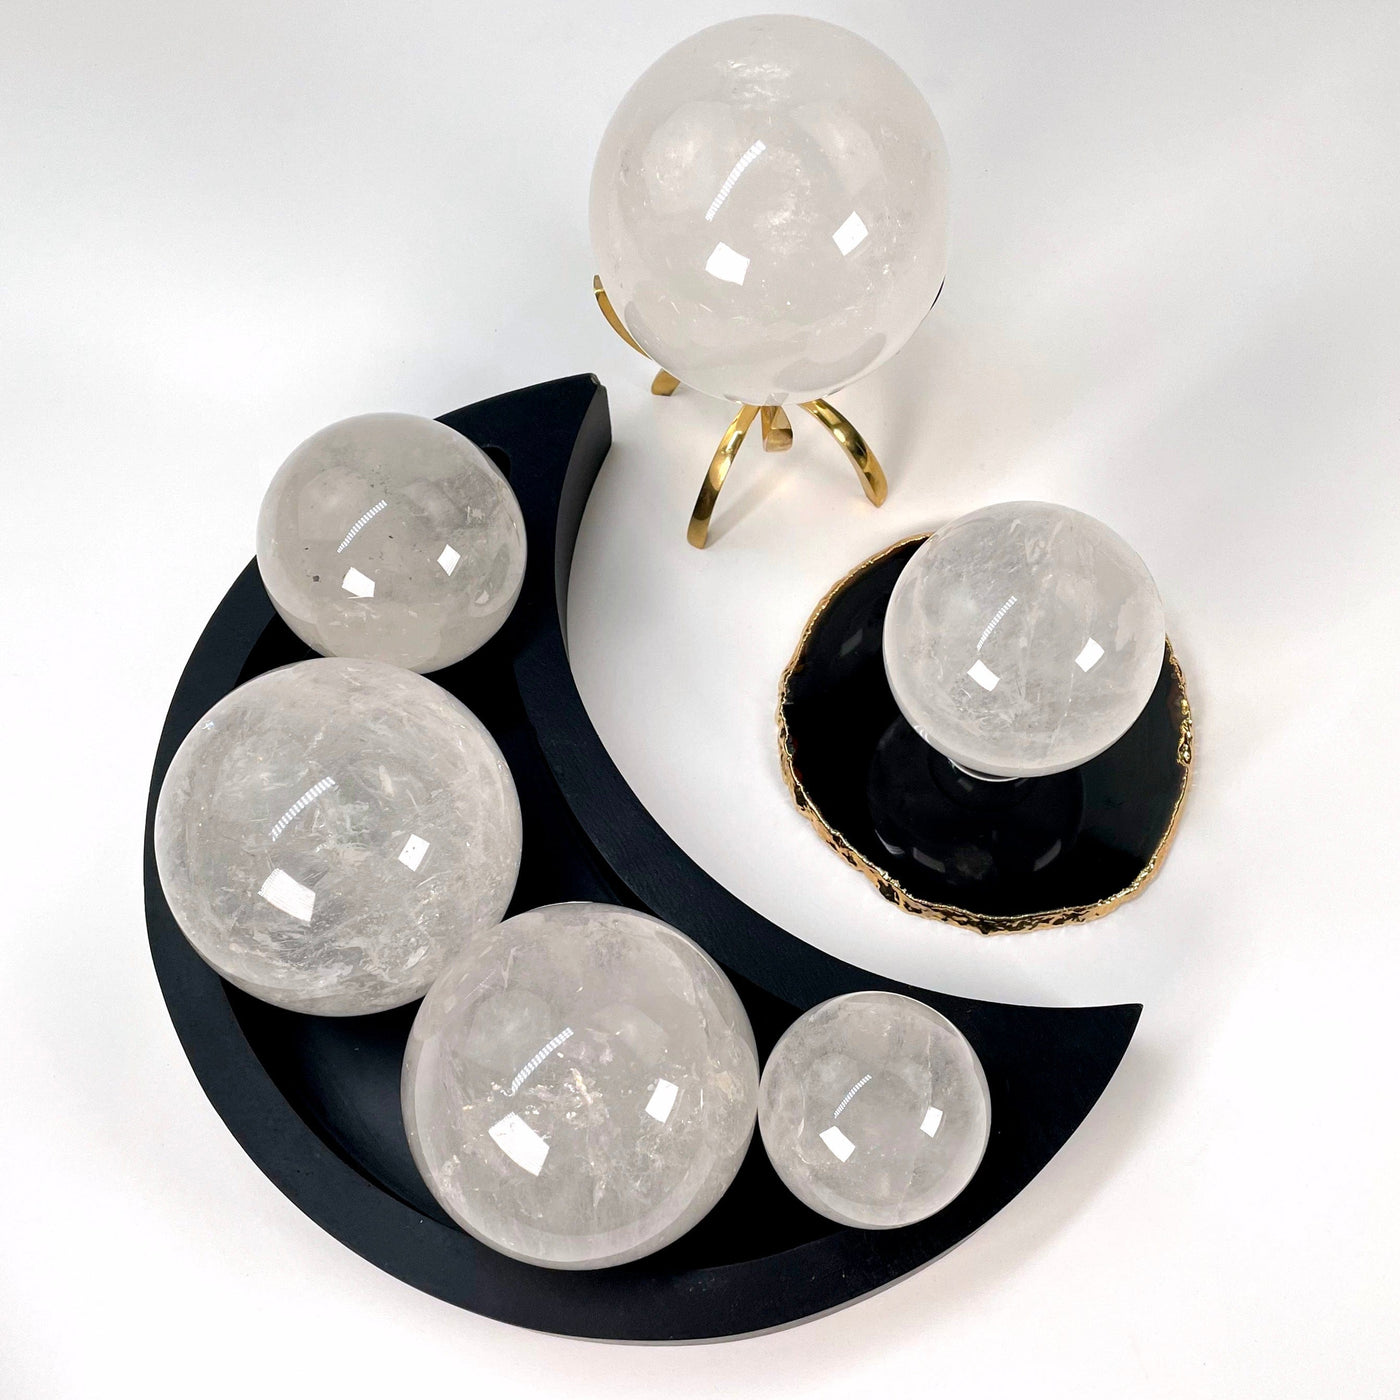 many different crystal quartz polished sphere weights on display for possible variations